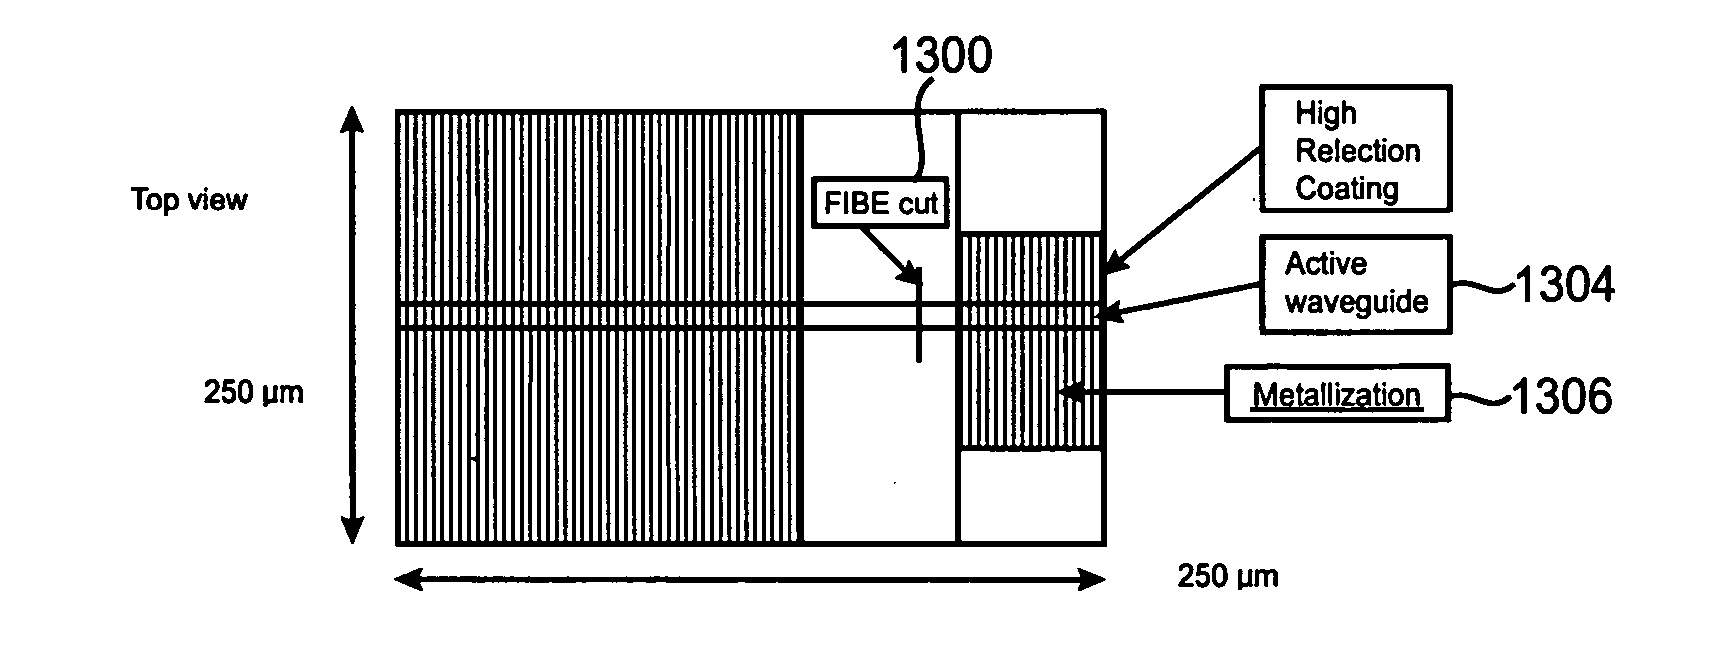 Material processing method for semiconductor lasers